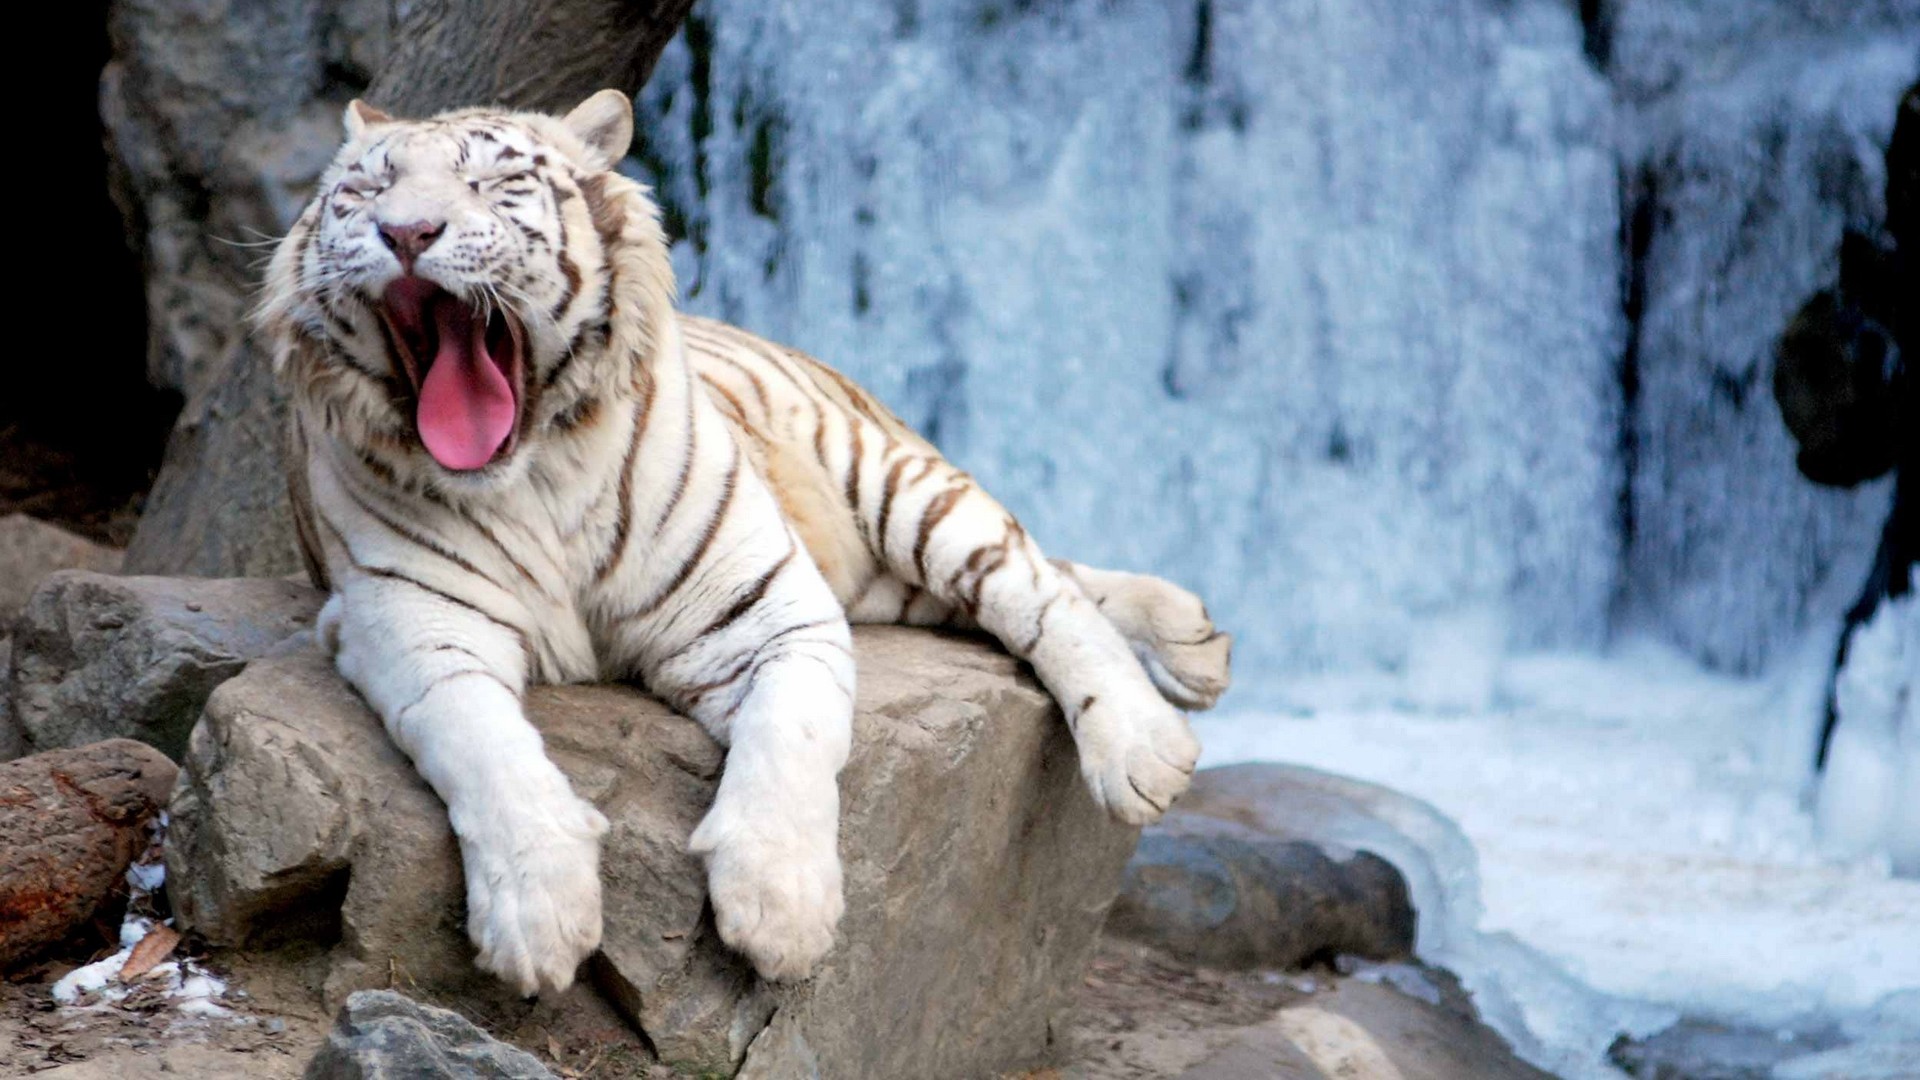 White Tiger Widescreen Background Wallpapers 6678   Amazing Wallpaperz 1920x1080